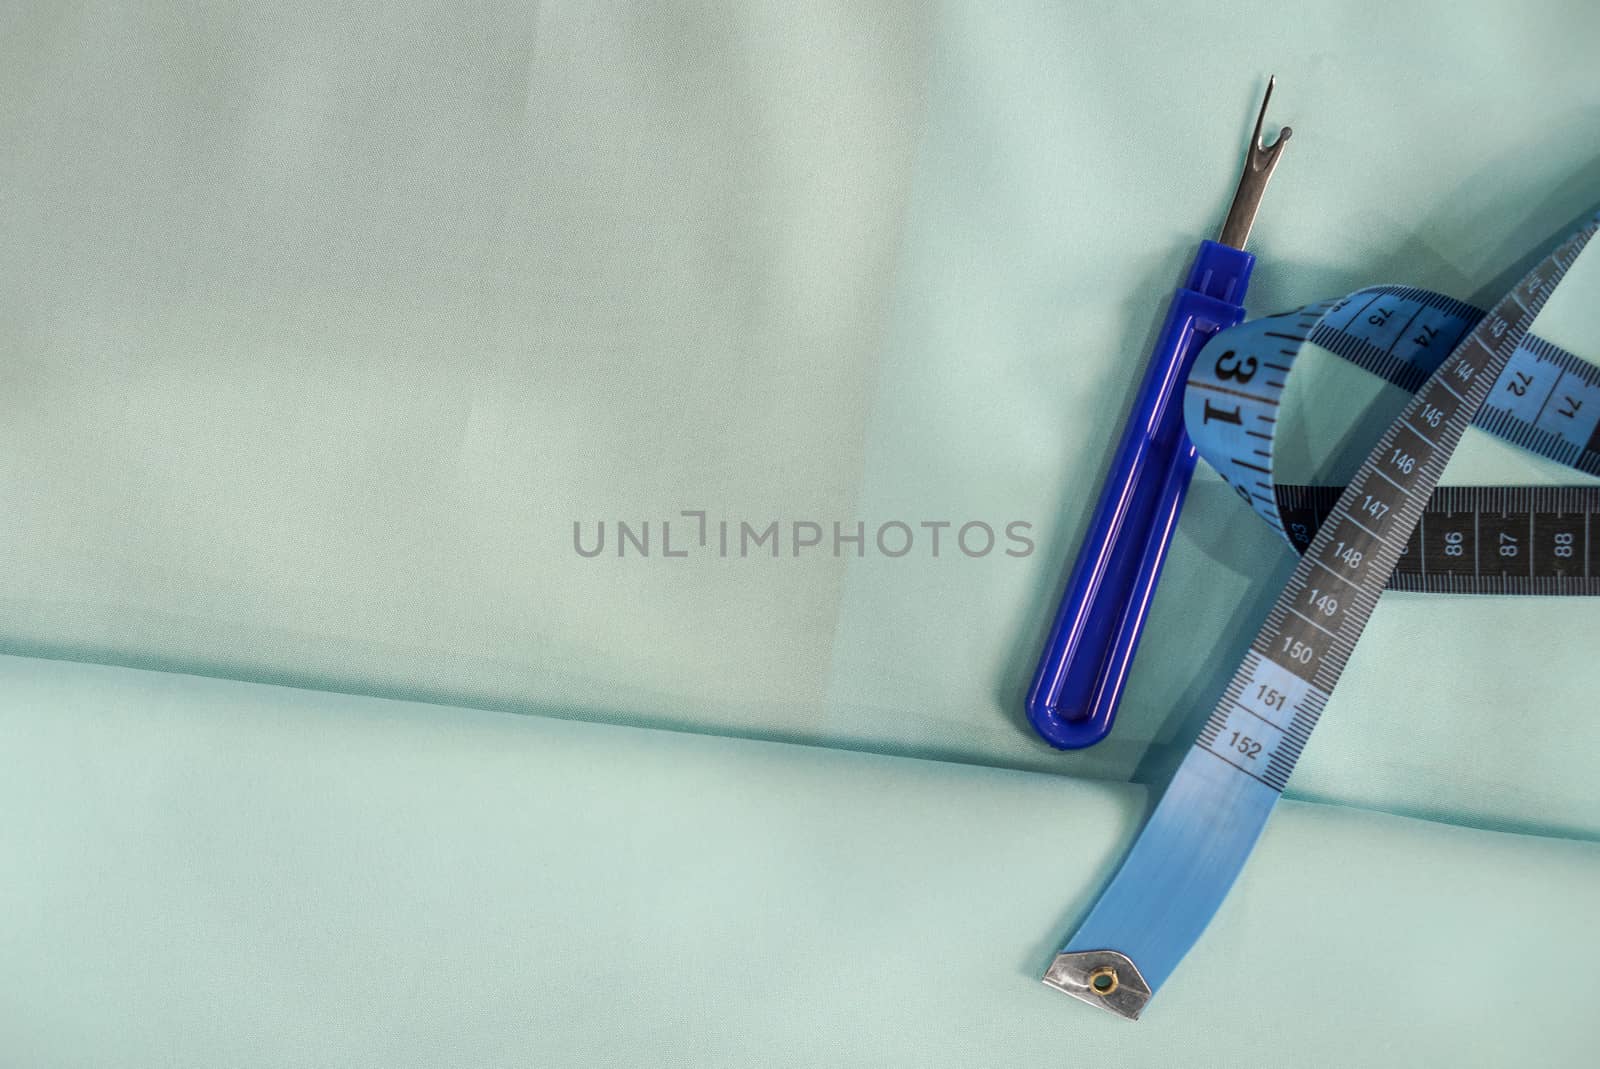 Measuring cables, Thread Picker, Sewing Craft Tool on blue fabric by chadchai_k